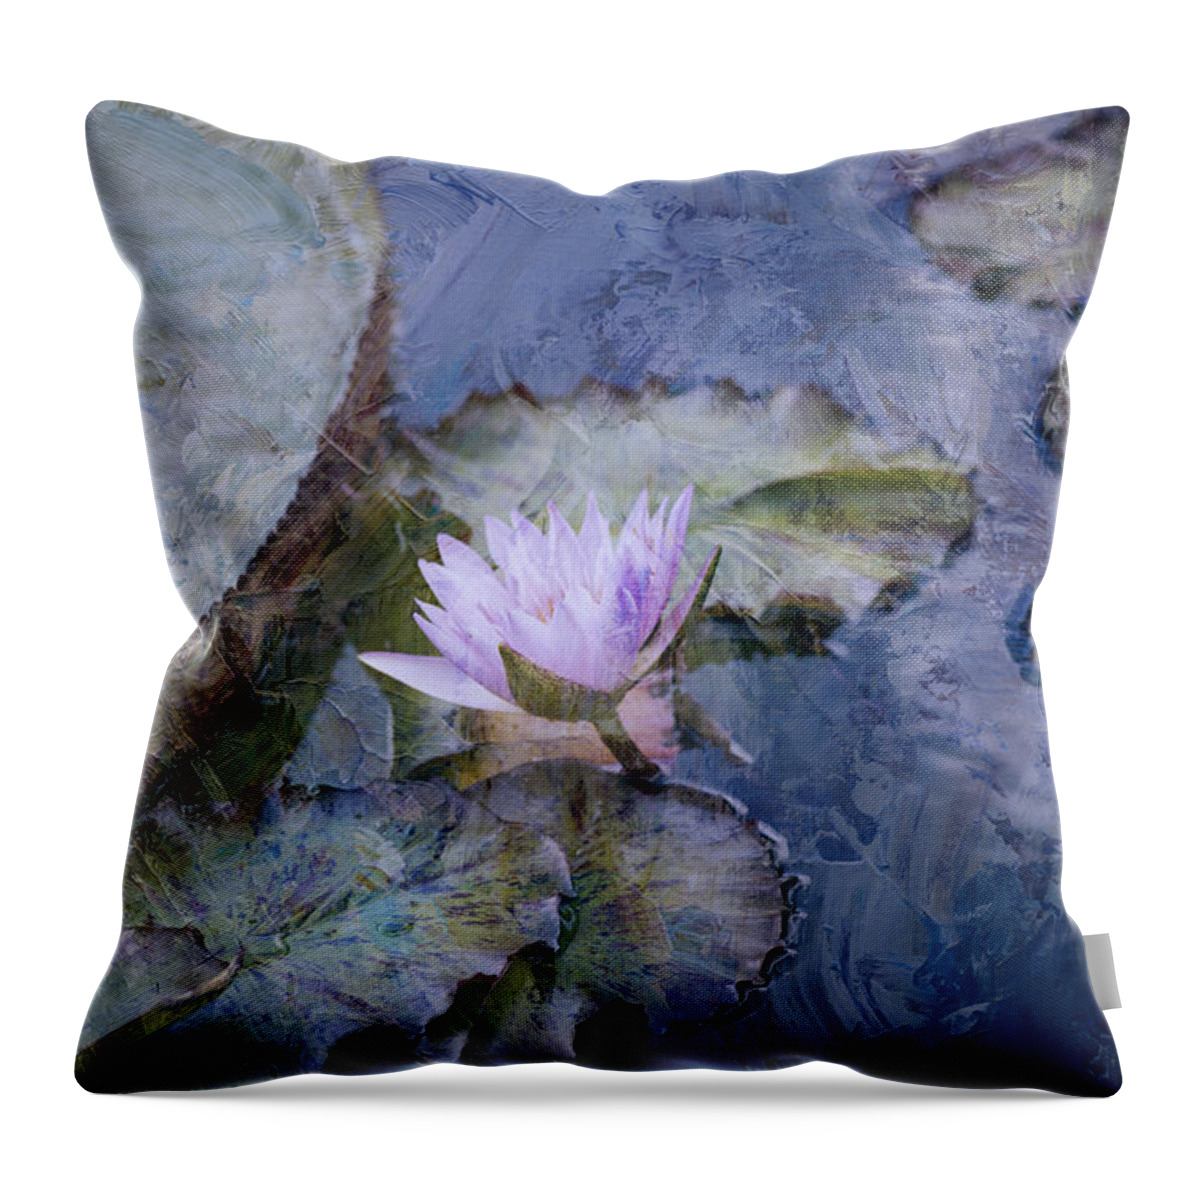 Blue Throw Pillow featuring the photograph Blue by John Rivera